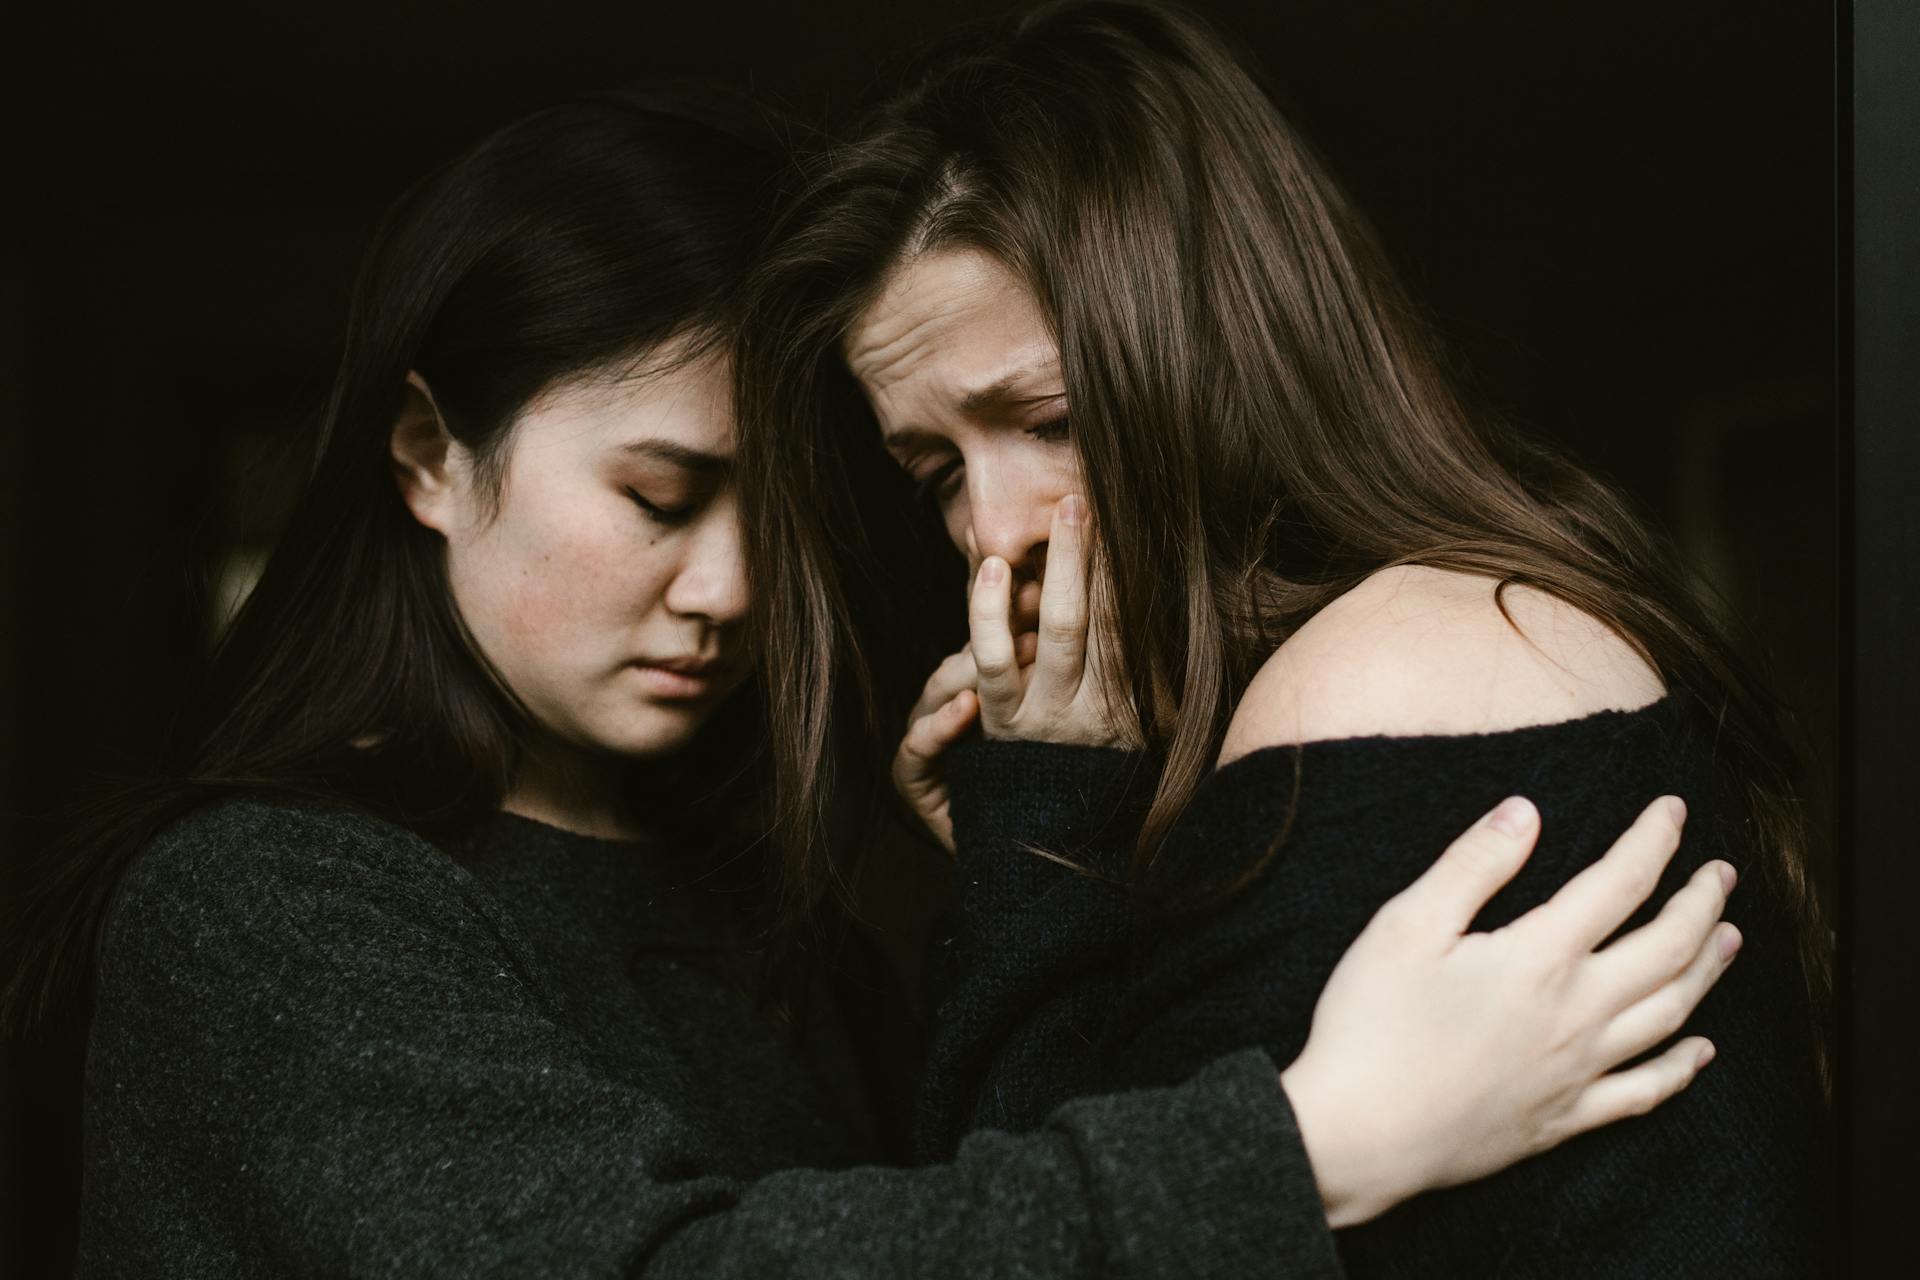 A woman consoles another woman | Source: Pexels